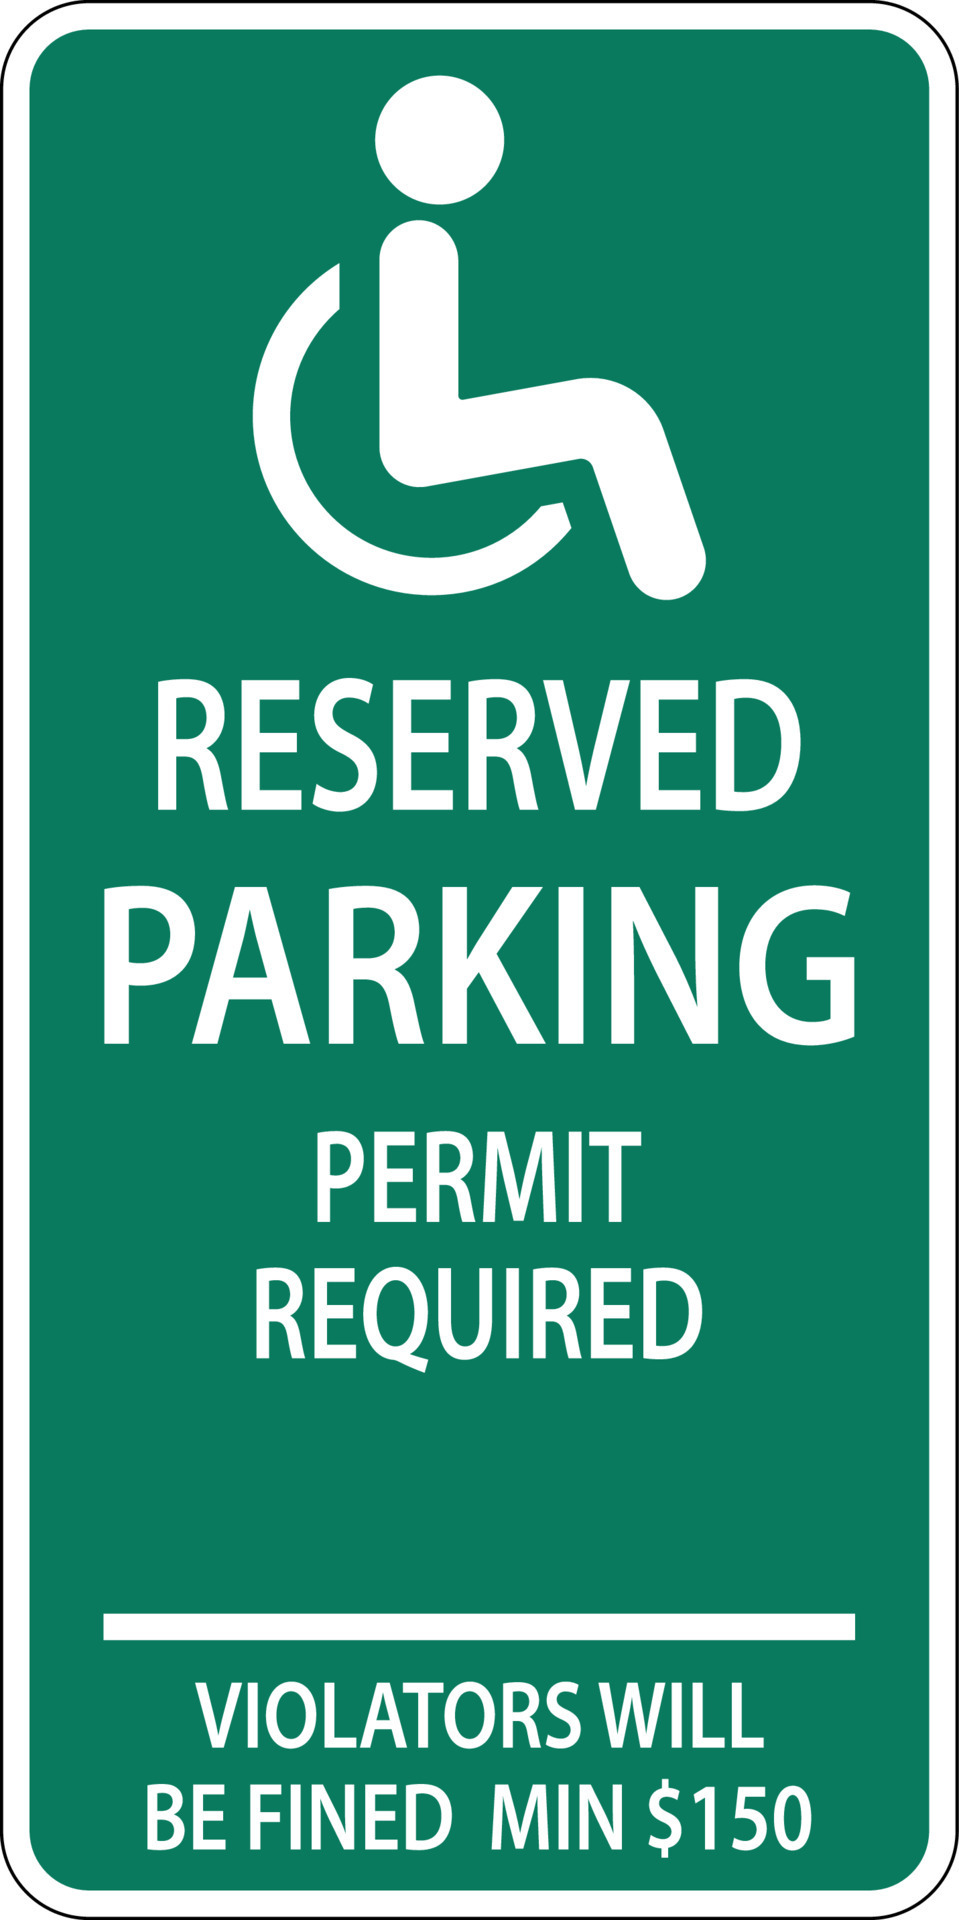 Disabled parking Permit required Safety sign 